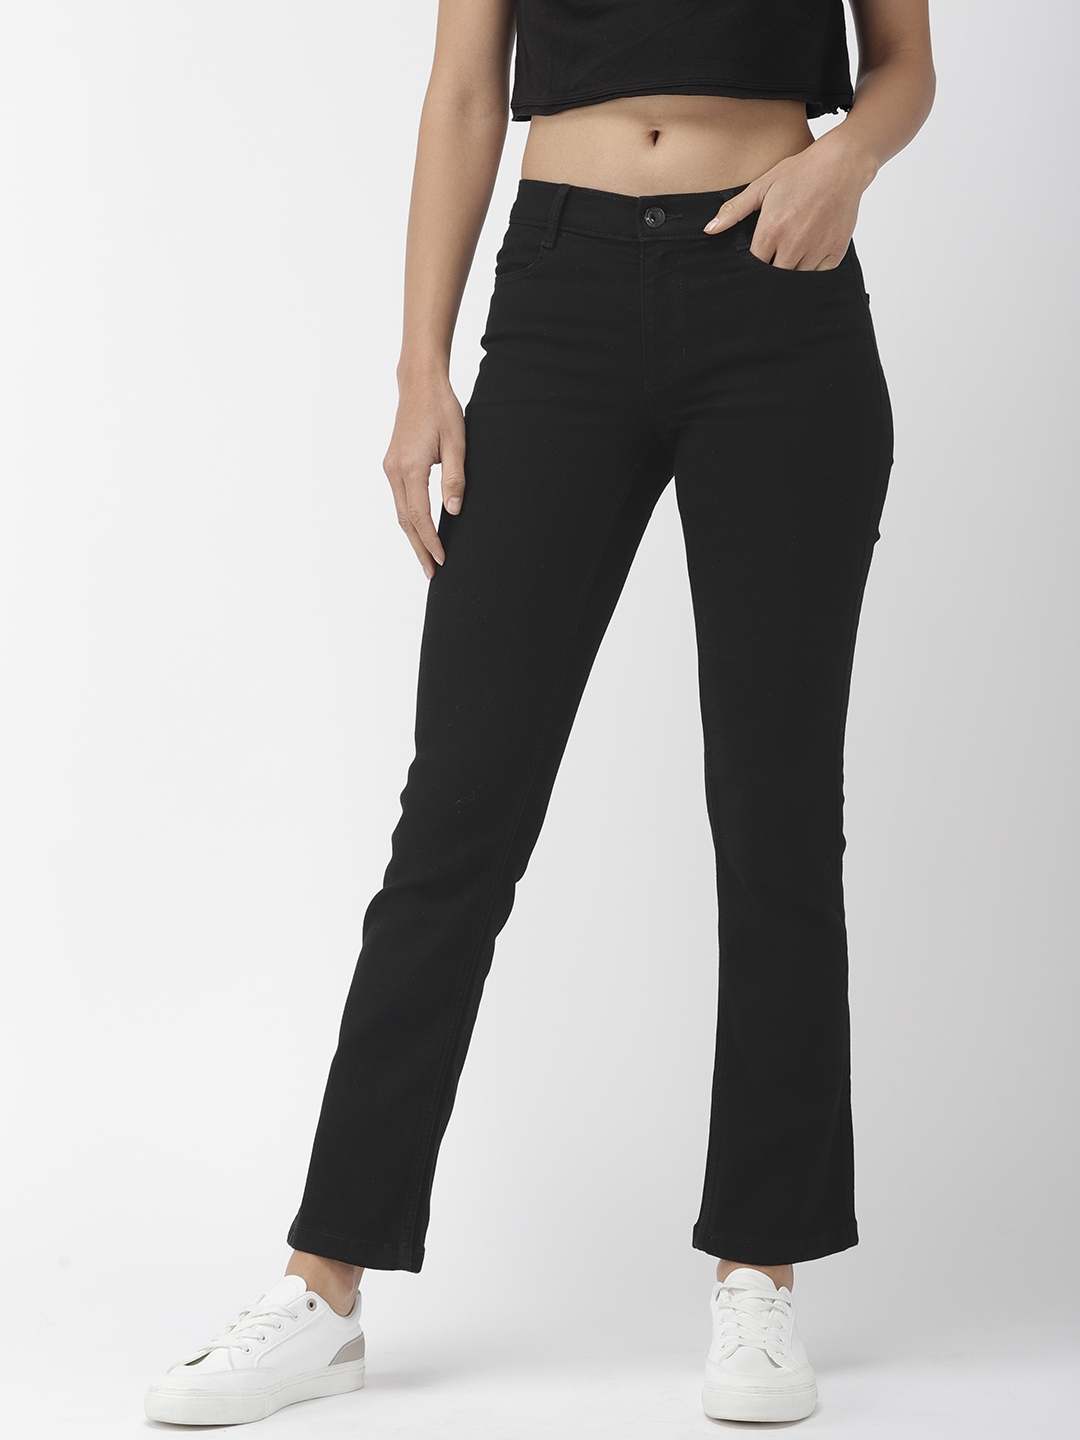 Buy Marks & Spencer Women Black Slim Bootcut Fit Mid Rise Clean Look Stretchable Jeans - Jeans 